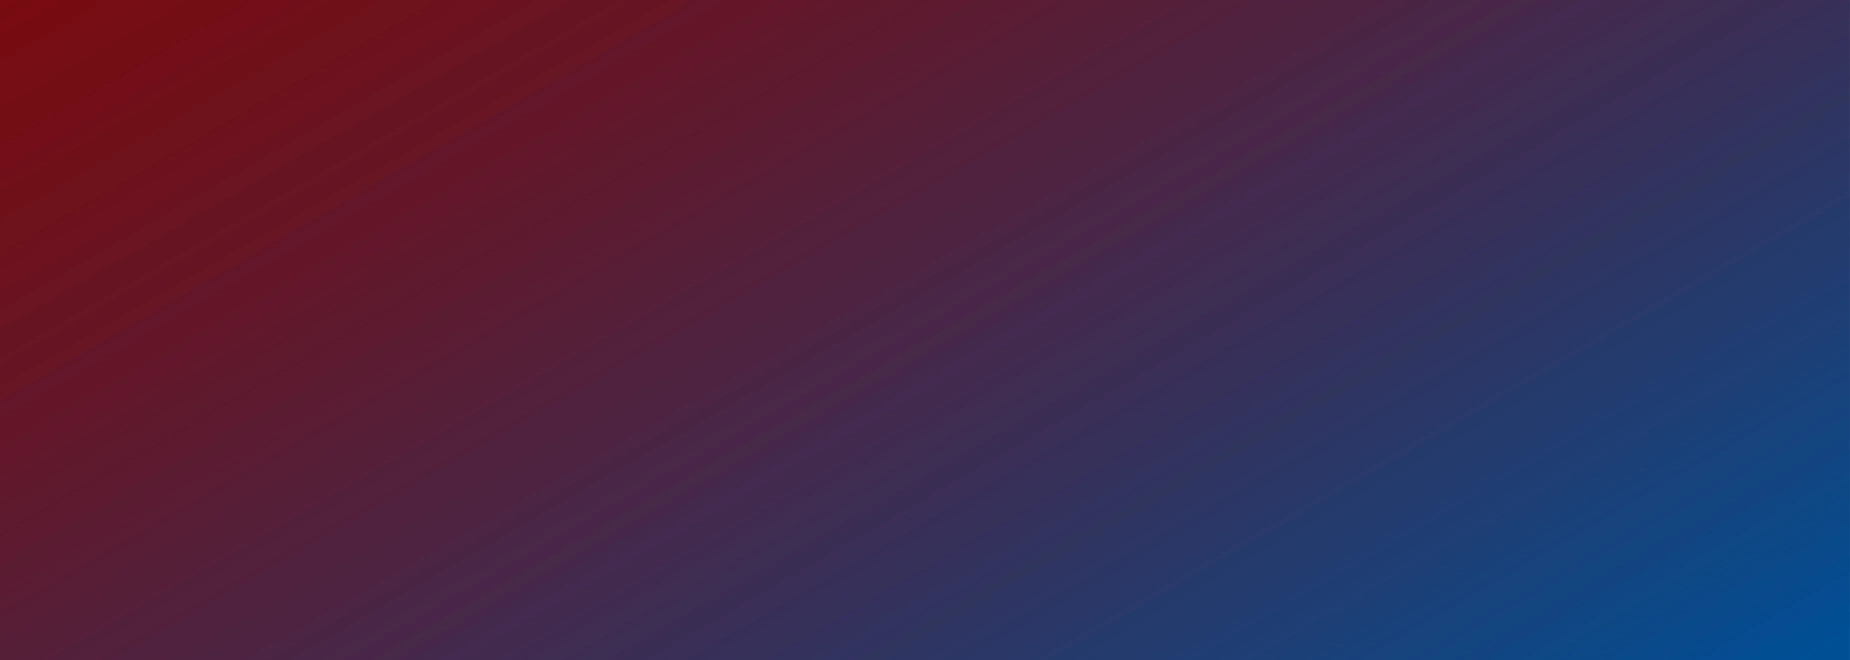 Red to blue gradient background